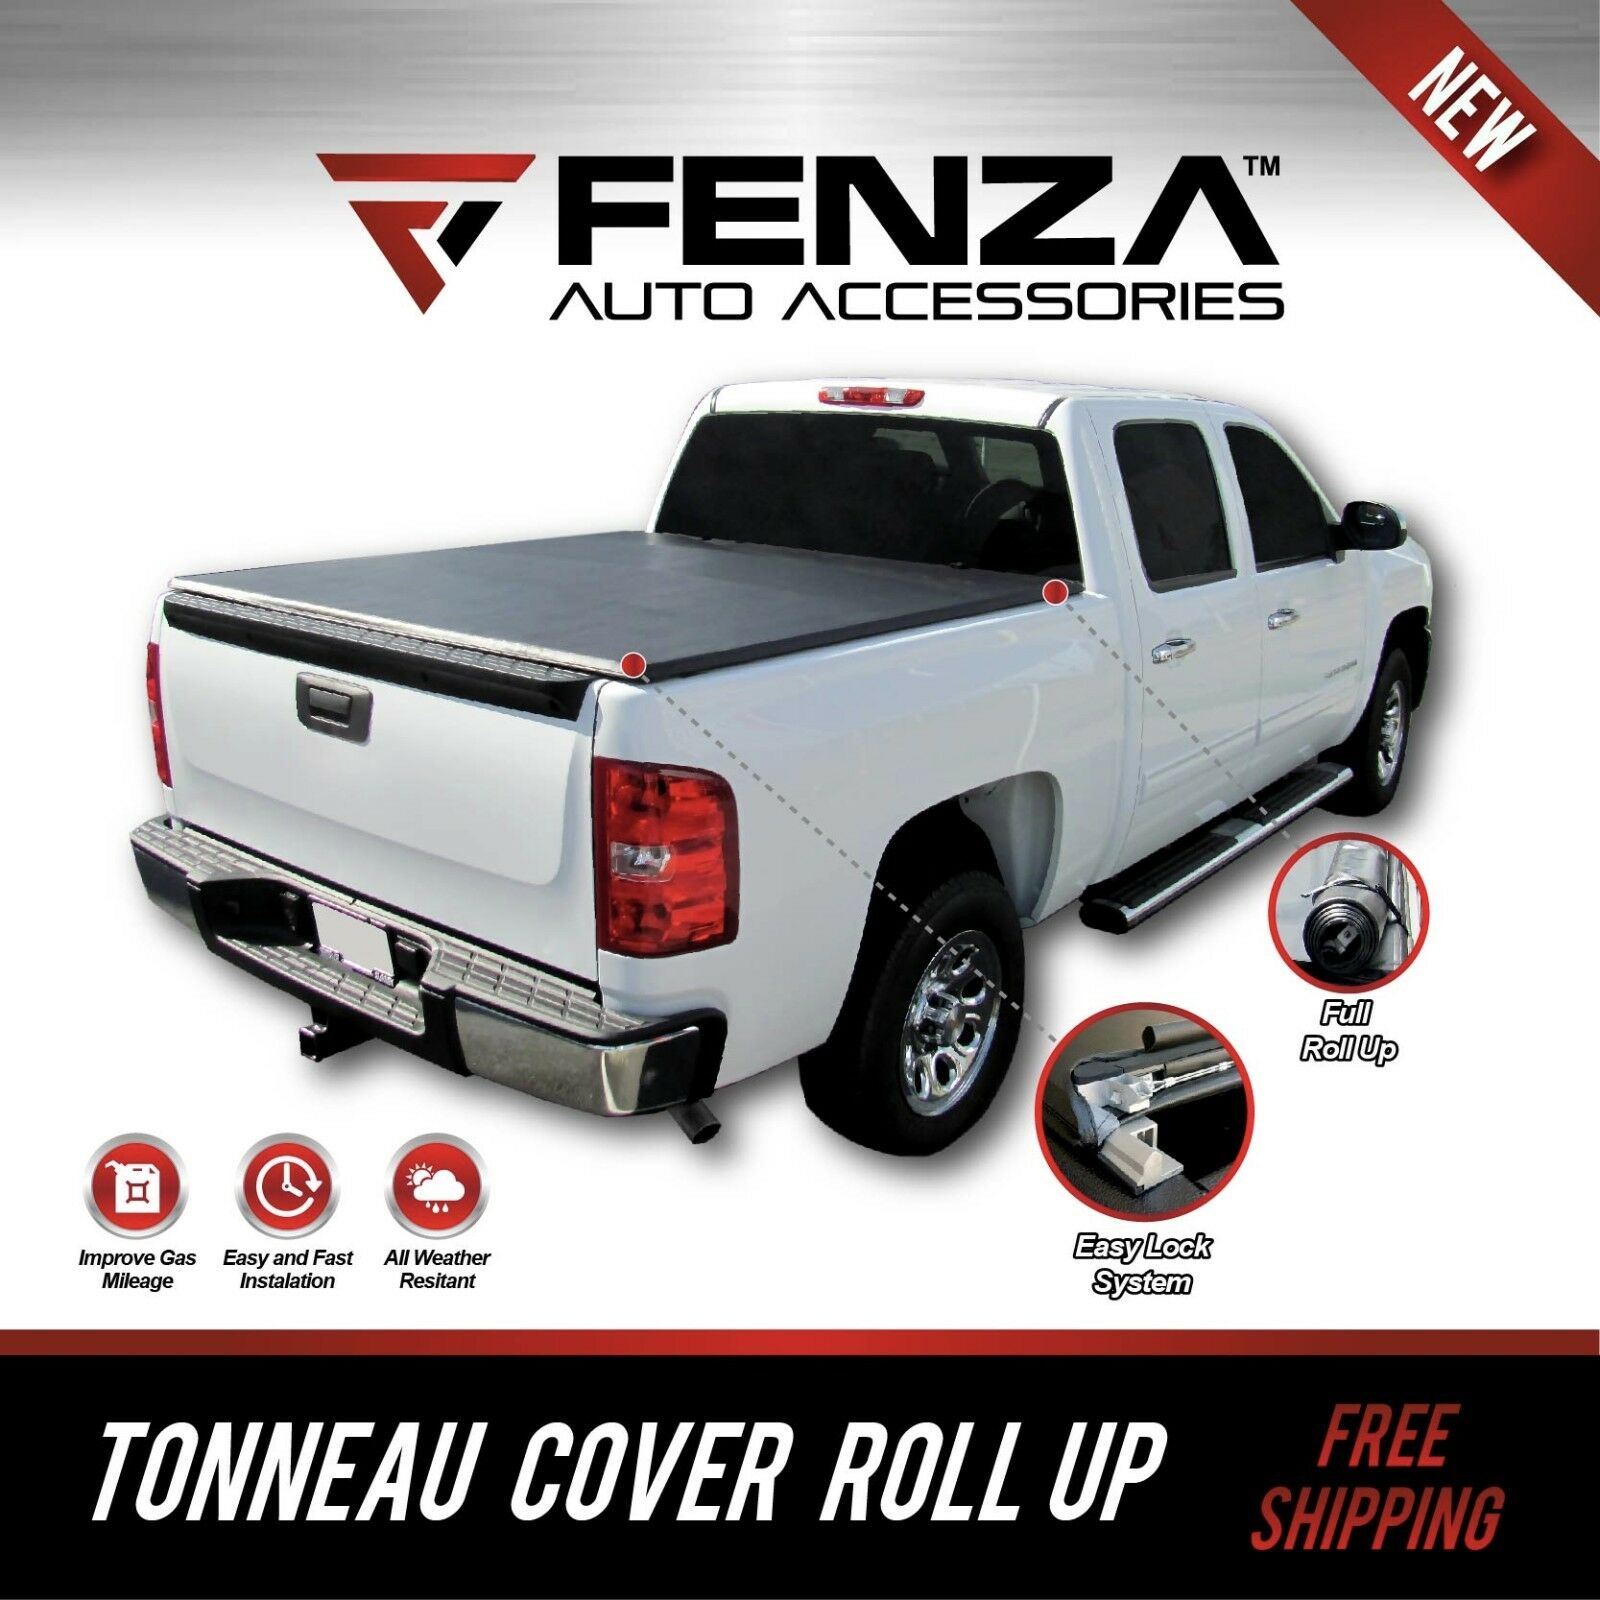 Soft Roll Up Tonneau Cover For Toyota Tacoma 2005 - 2014